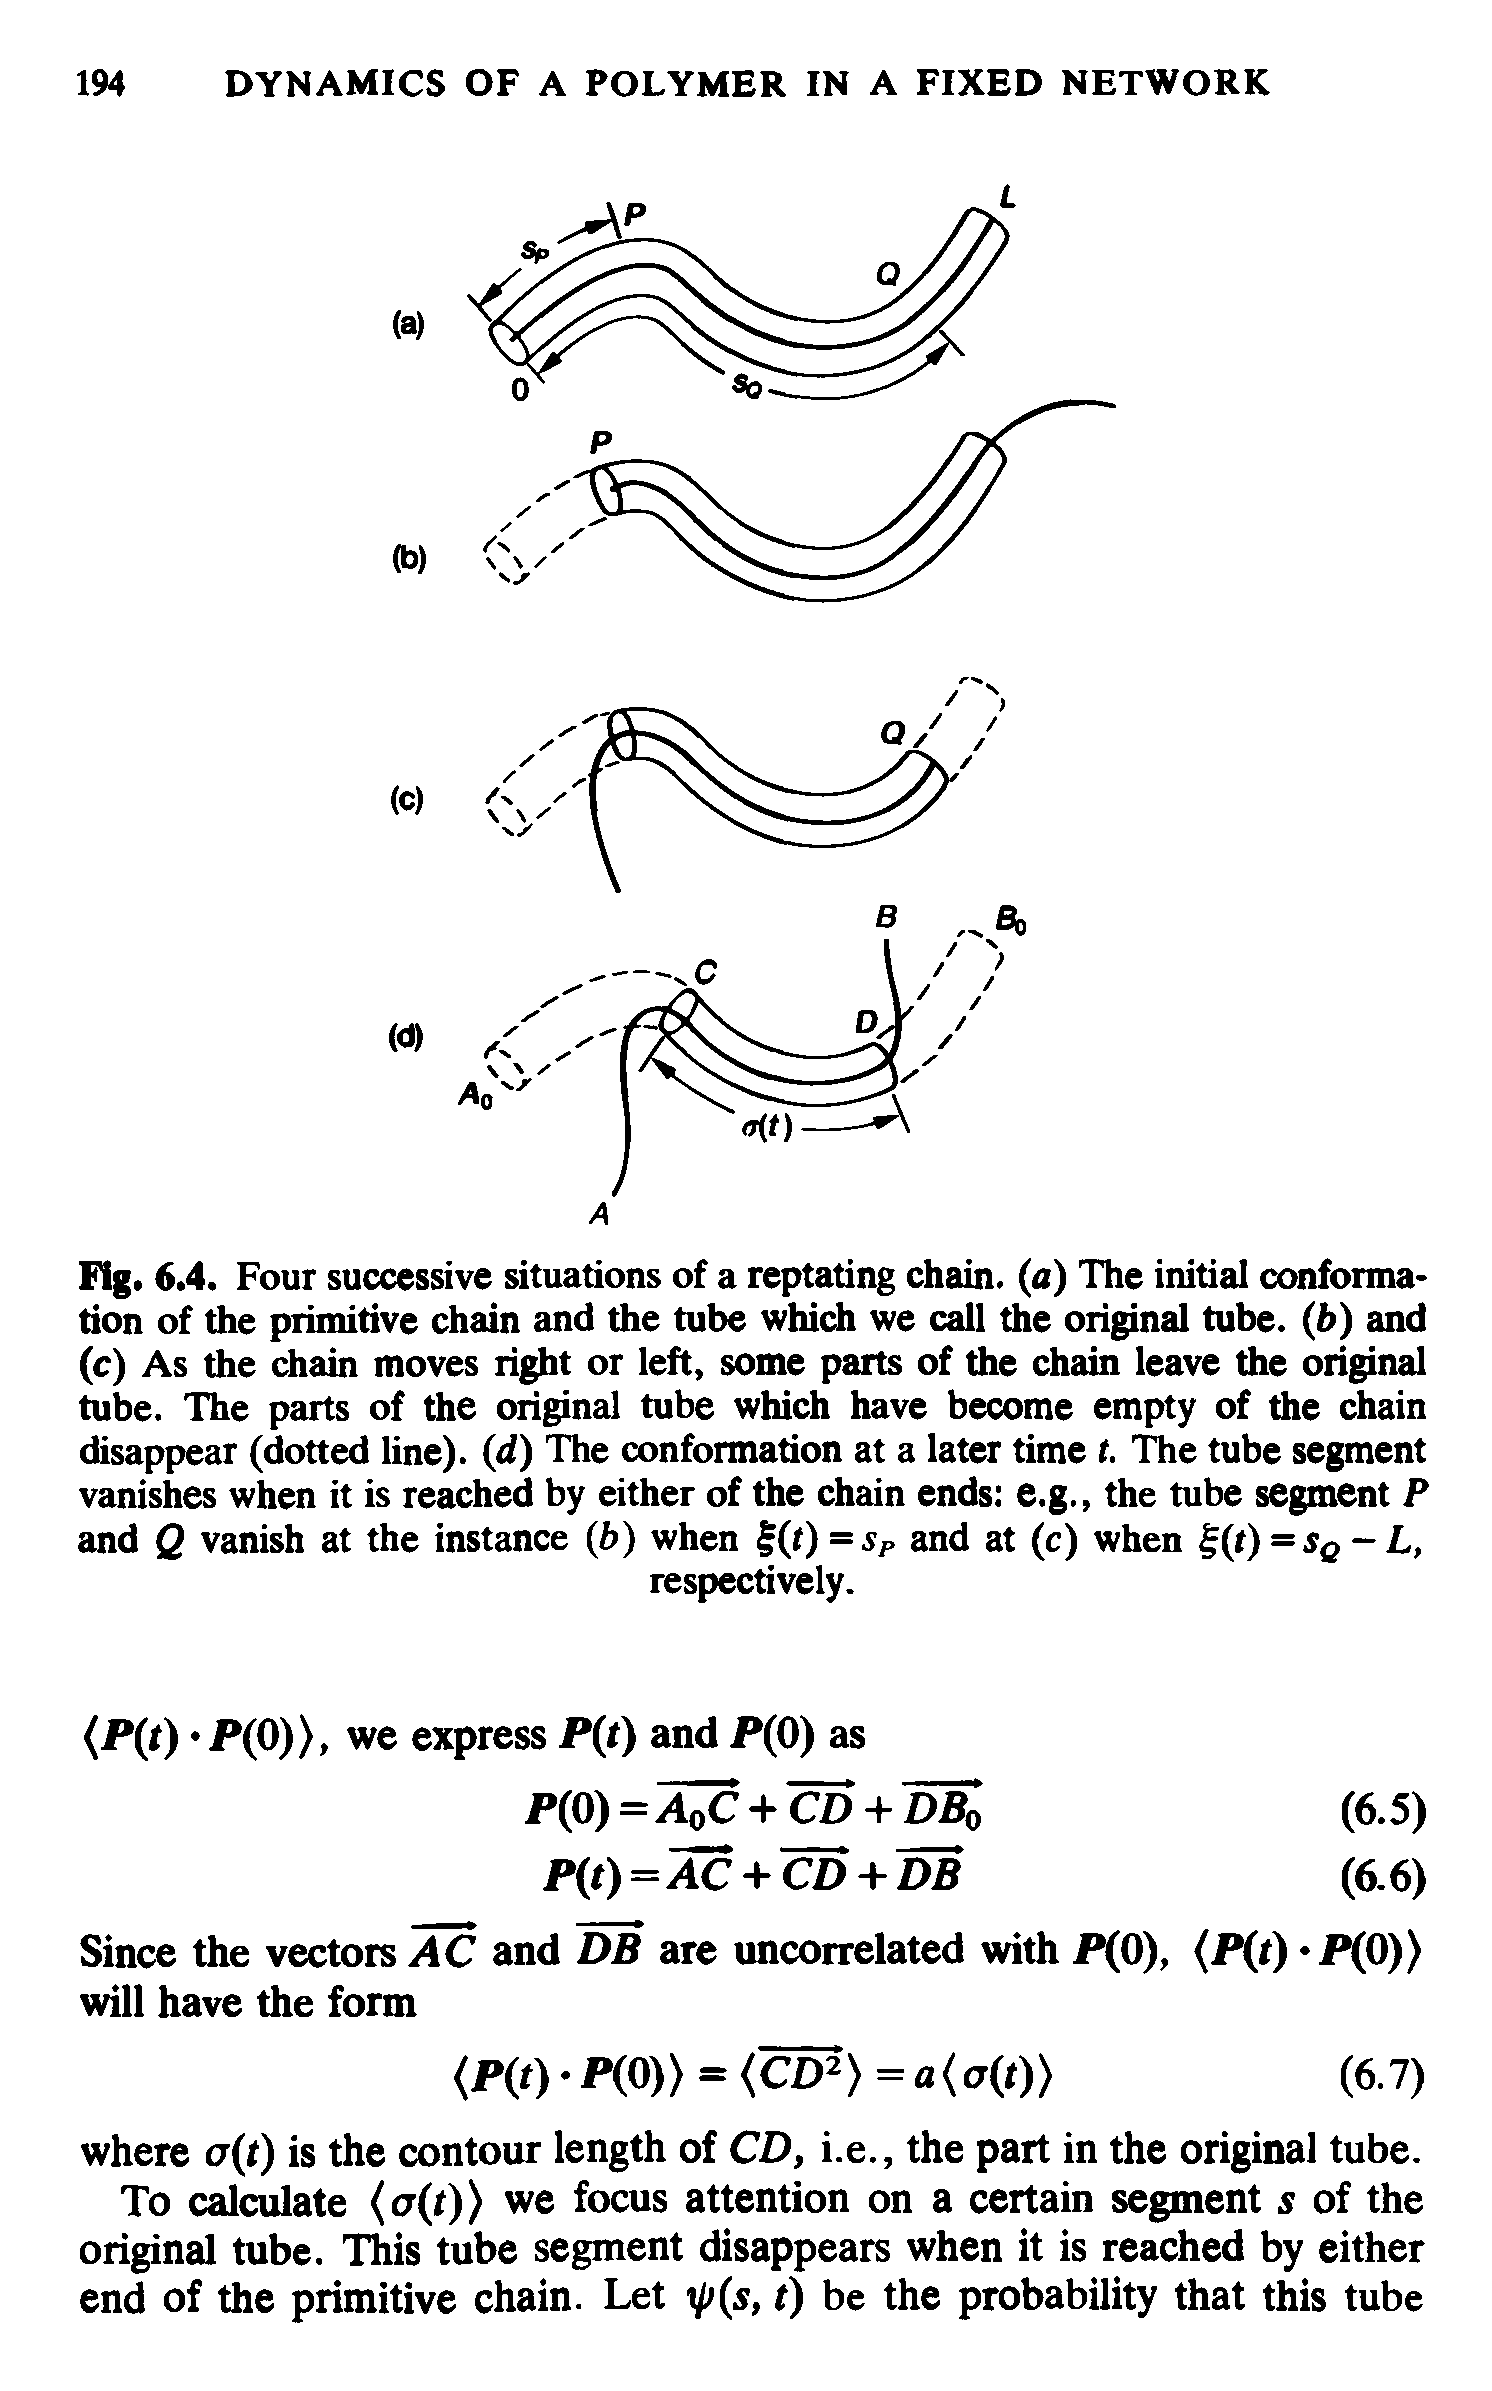 Fig. 6.4. Four successive situations of a reptating chain, (a) The initial conformation of the primitive chain and the tube which we call the original tube, (b) and (c) As the chain moves right or left, some parts of the chain leave the original tube. The parts of the original tube which have become empty of the chain disappear (dotted line), (d) The conformation at a later time t. The tube segment vanishes when it is reached by either of the chain ends e.g., the tube segment P and Q vanish at the instance (ft) when (t) = Sp and at (c) when t) = SQ-L,...